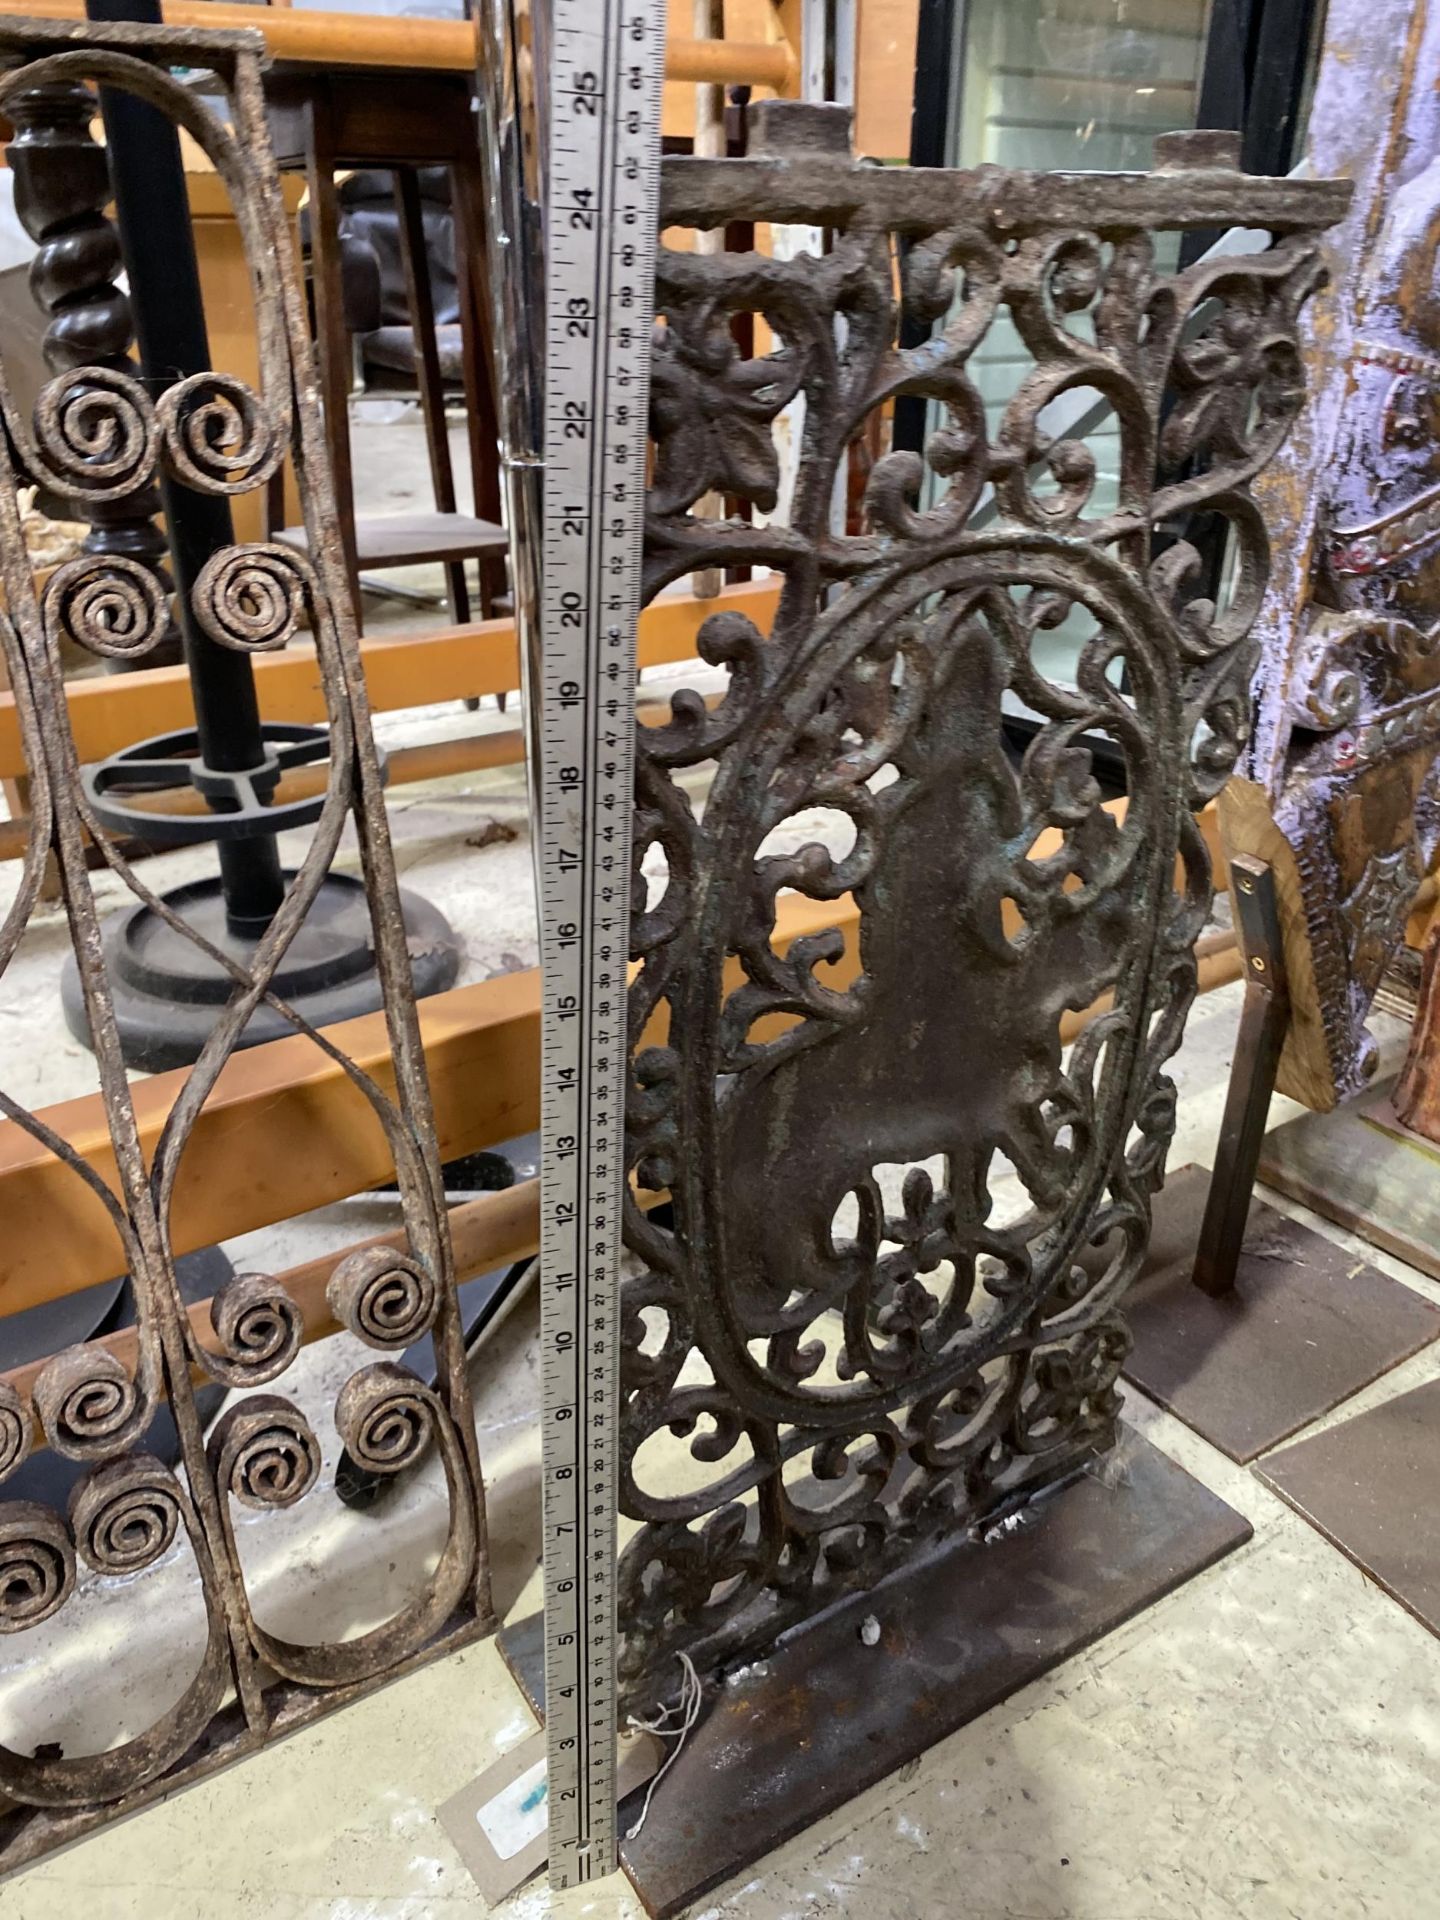 A CAST METAL ORNATE PLAQUE ON STAND, 24.5" HIGH - Image 2 of 2